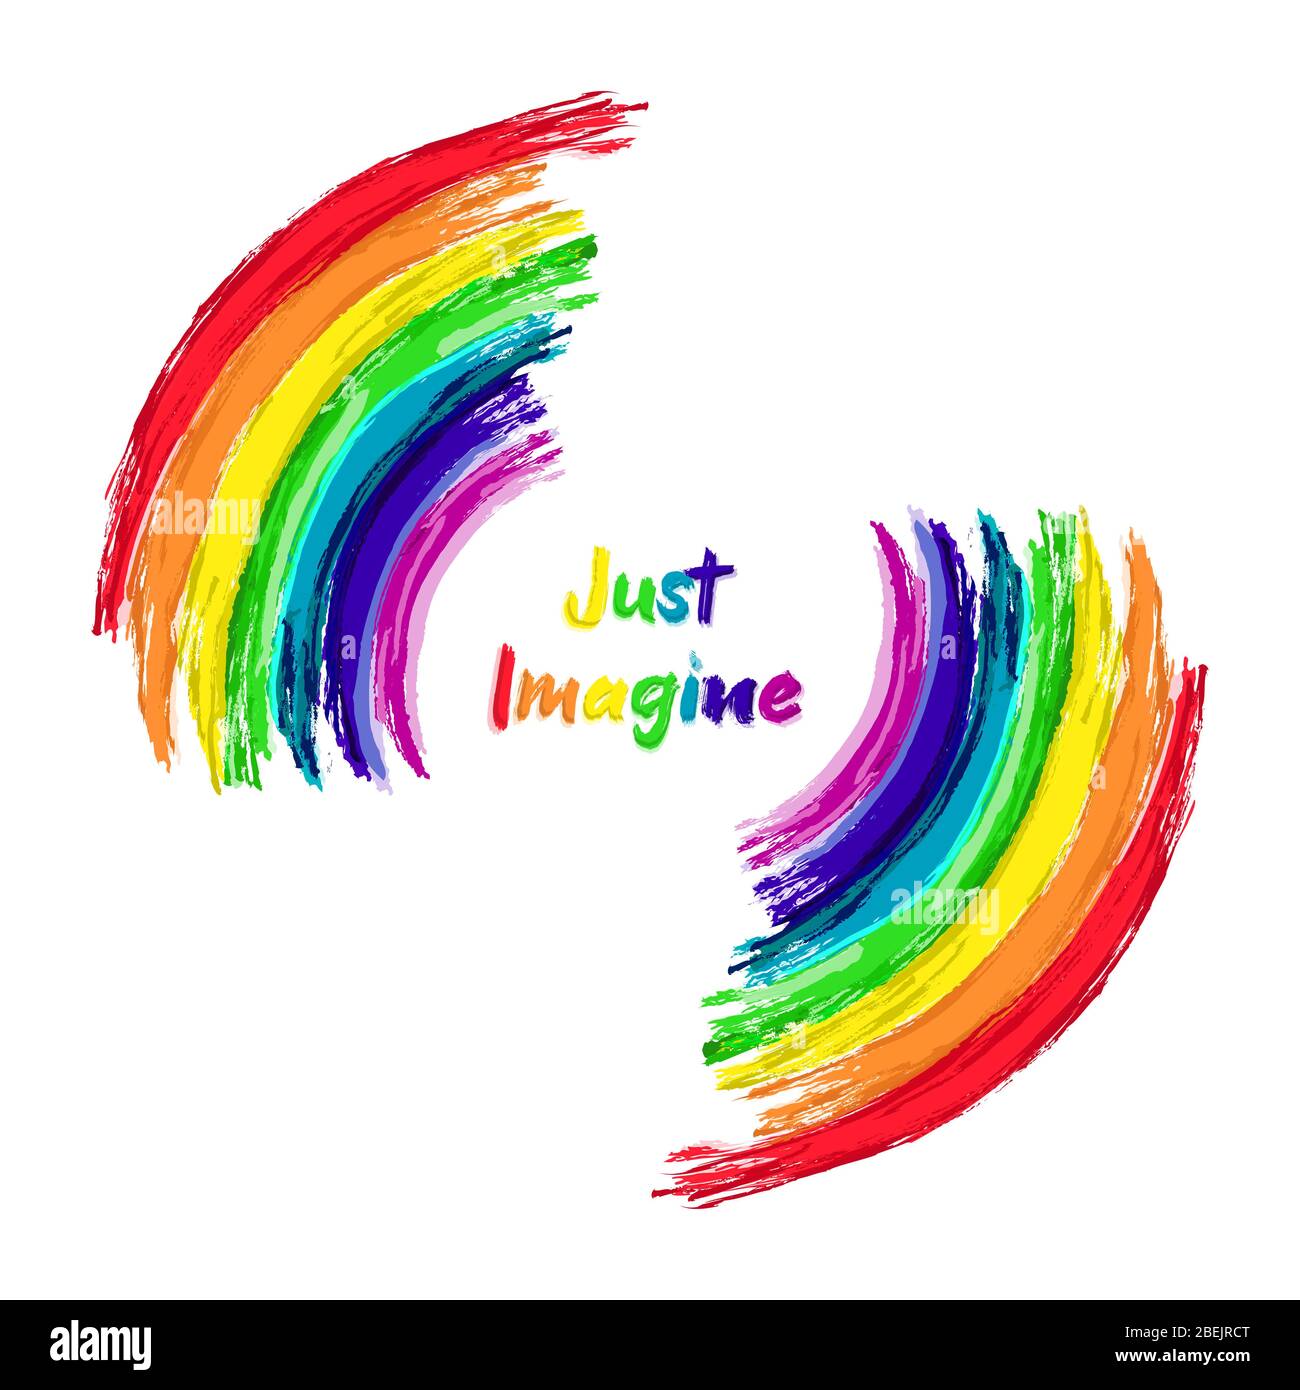 Just imagine rainbow paintings with inspirational text isolated on white background. Positive vibes, colorful motivational message illustration. Stock Photo